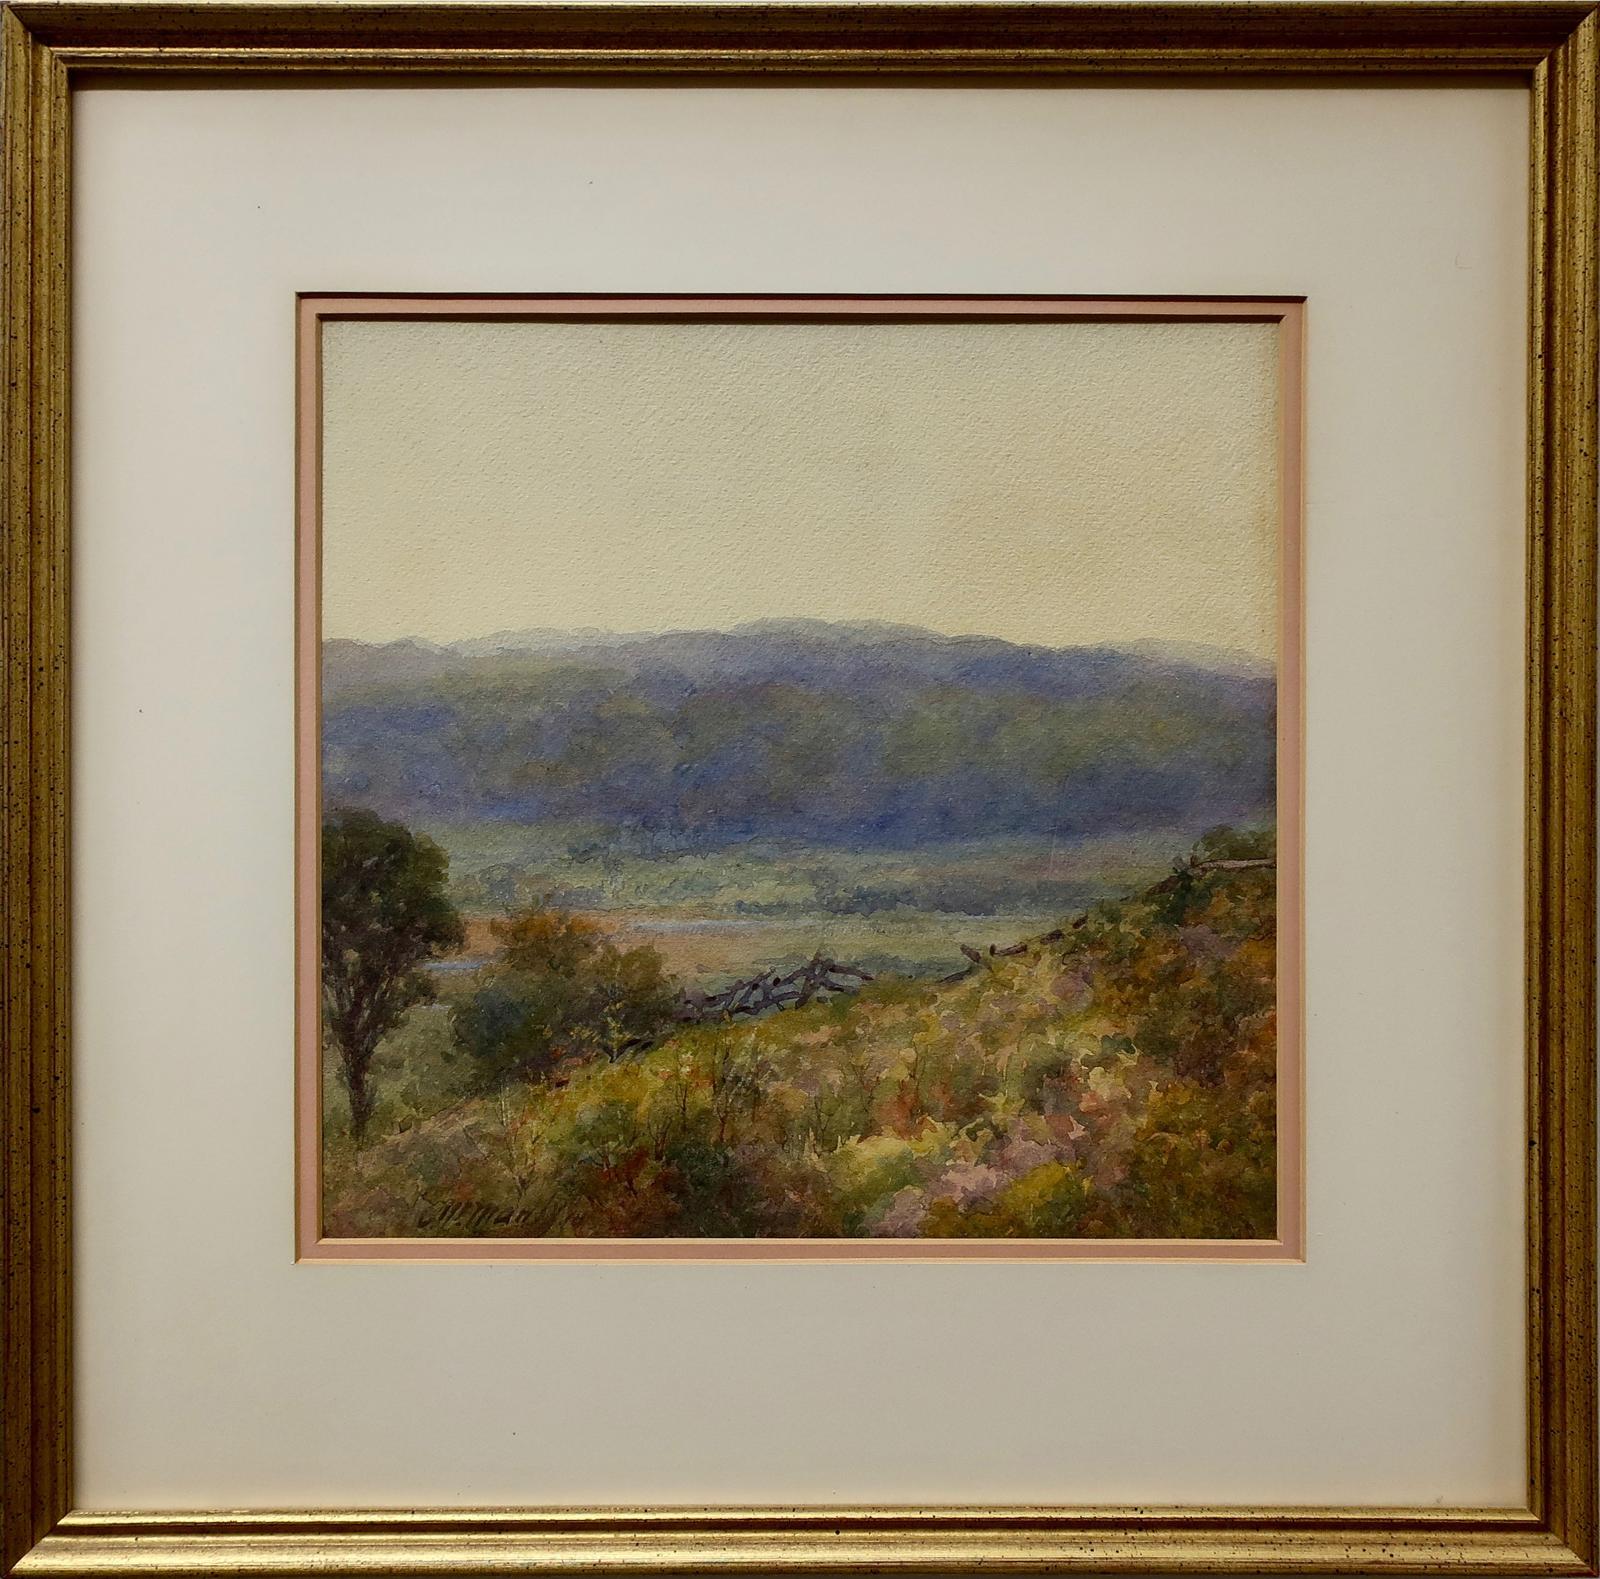 Charles MacDonald Manly (1855-1924) - Untitled (River Valley)